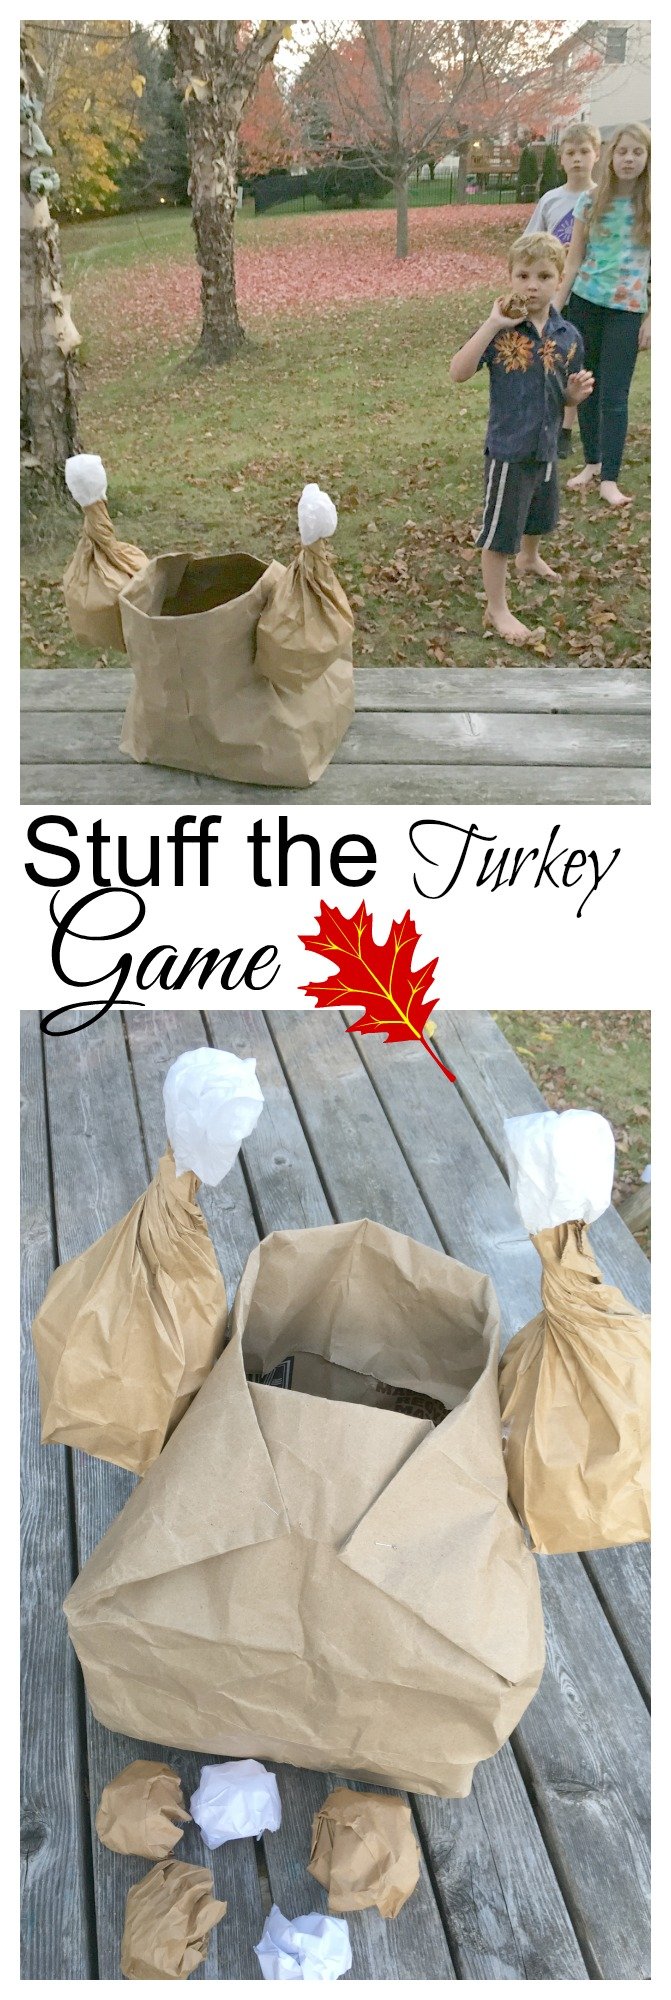 Stuff the Turkey Game. Perfect for preschool or elementary school Thanksgiving parties! This is so easy to make, and the kids have a blast stuffing the turkey! - KidFriendlyThingsToDo.com